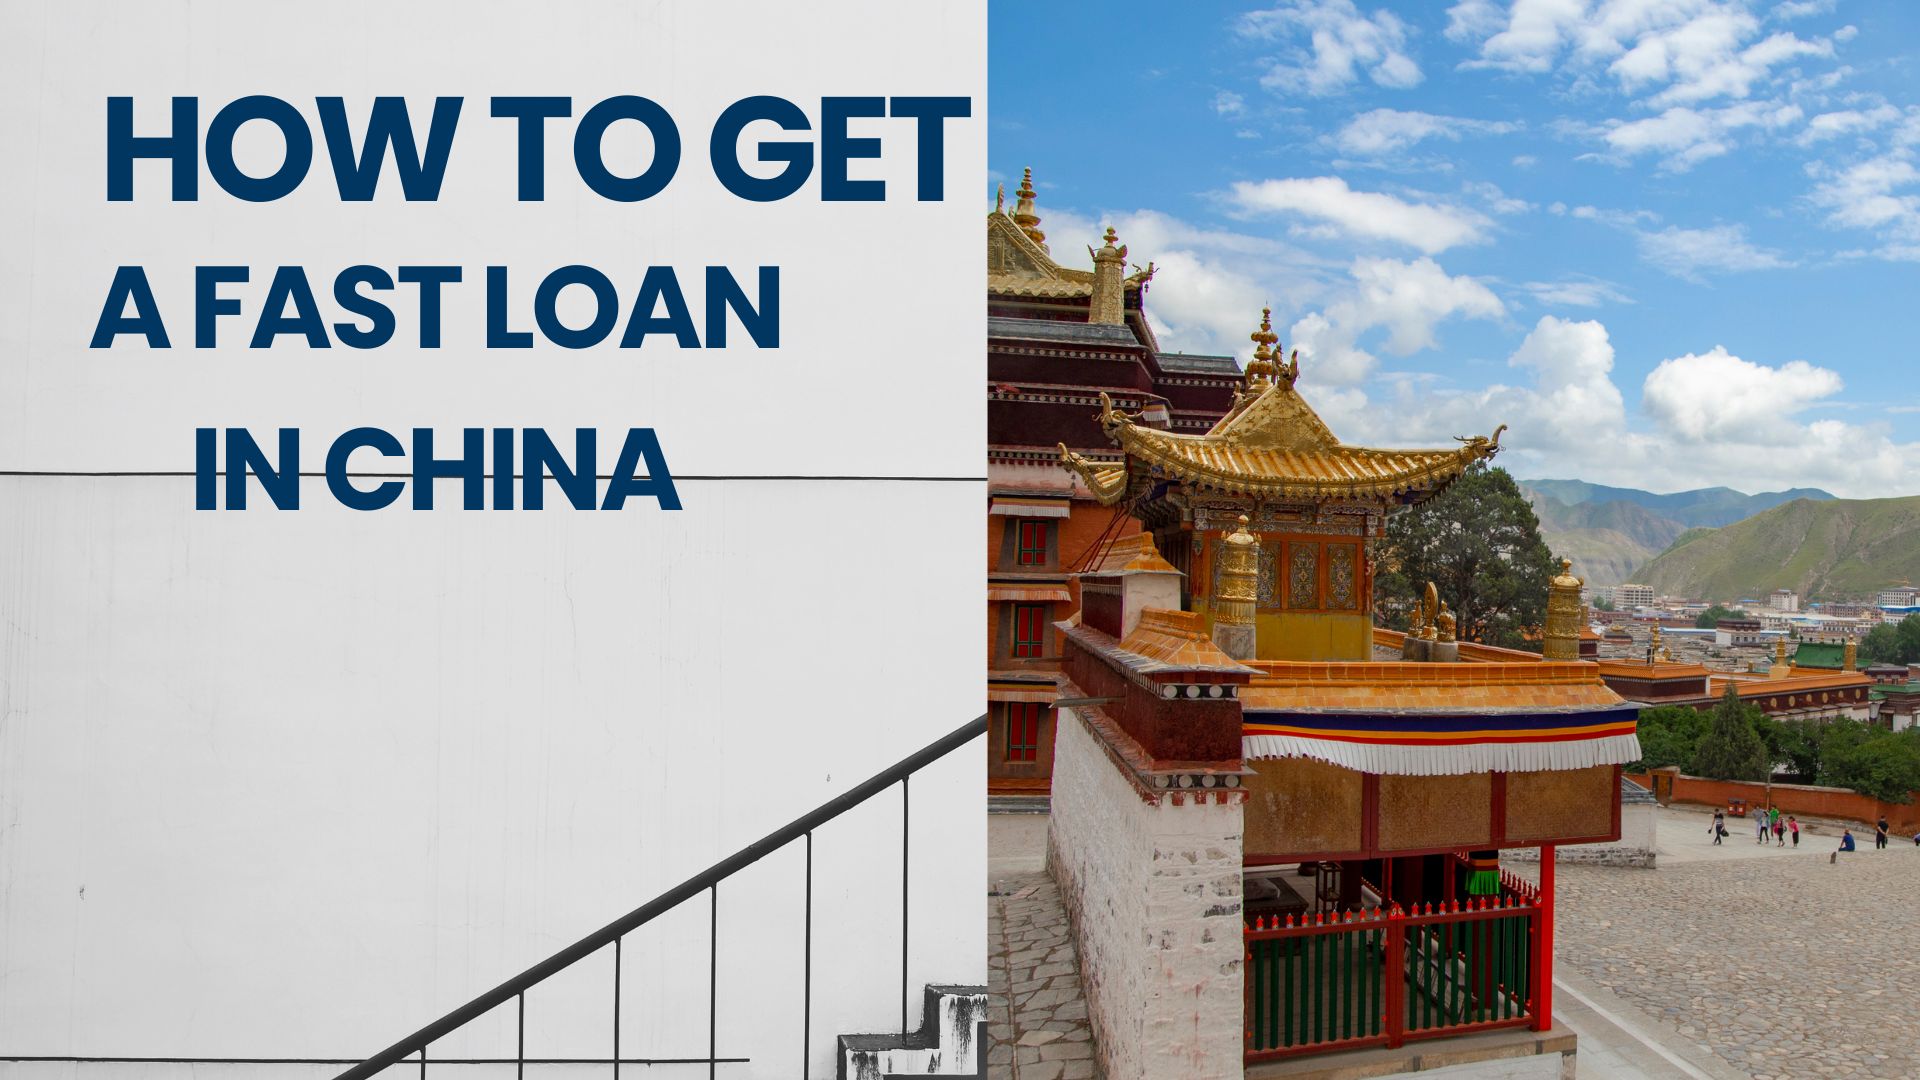 How to Get a Fast Loan in China